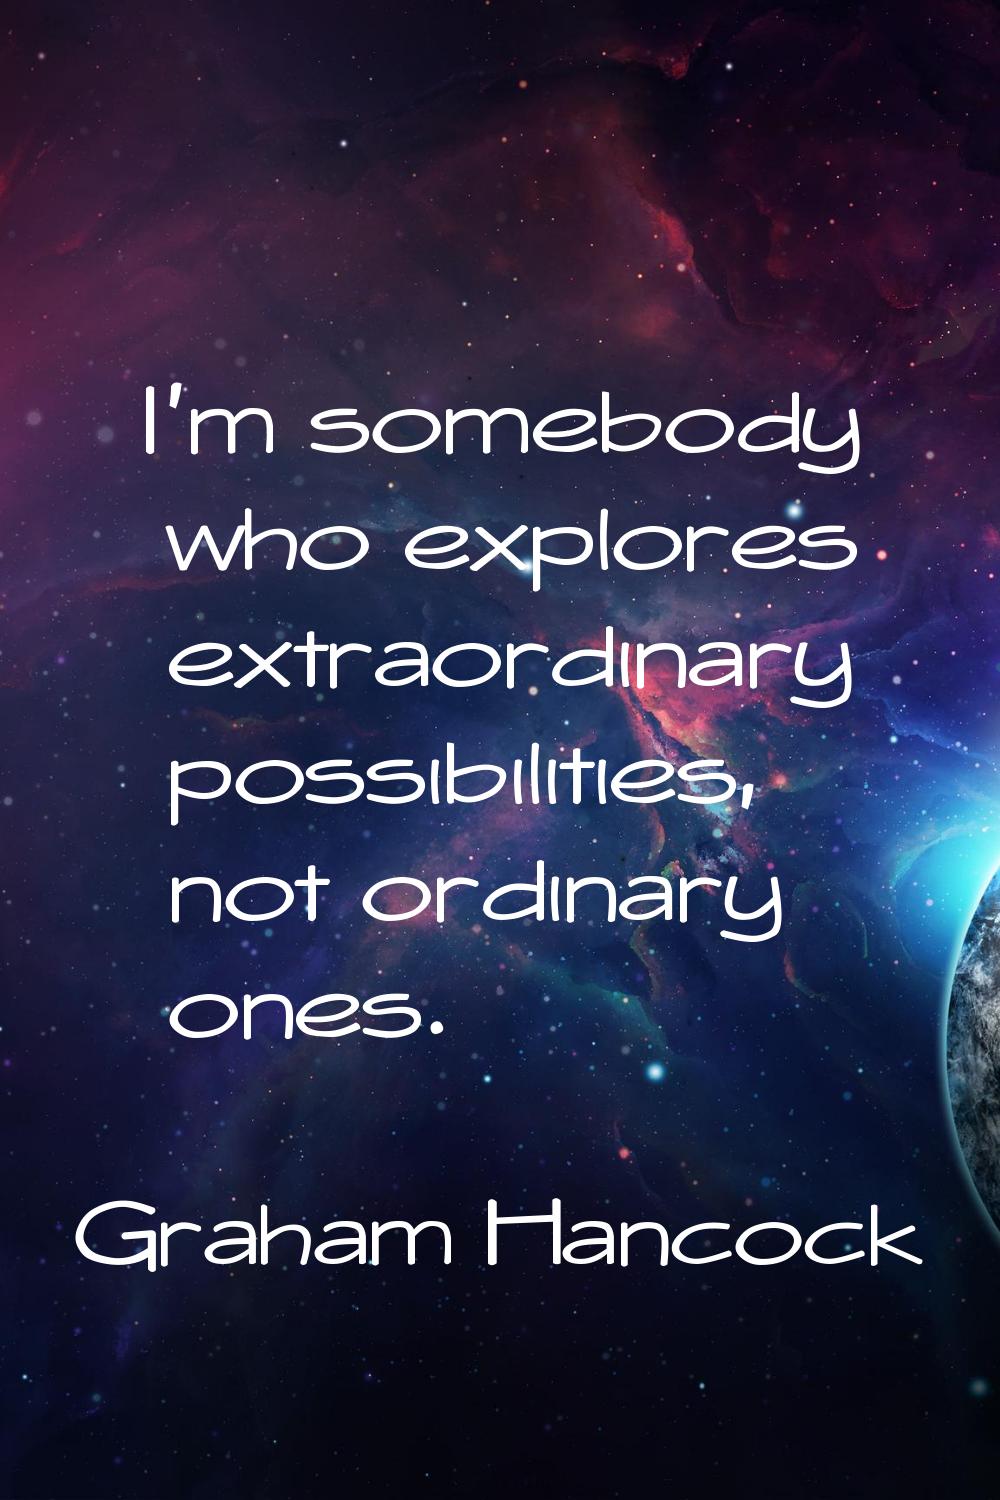 I'm somebody who explores extraordinary possibilities, not ordinary ones.